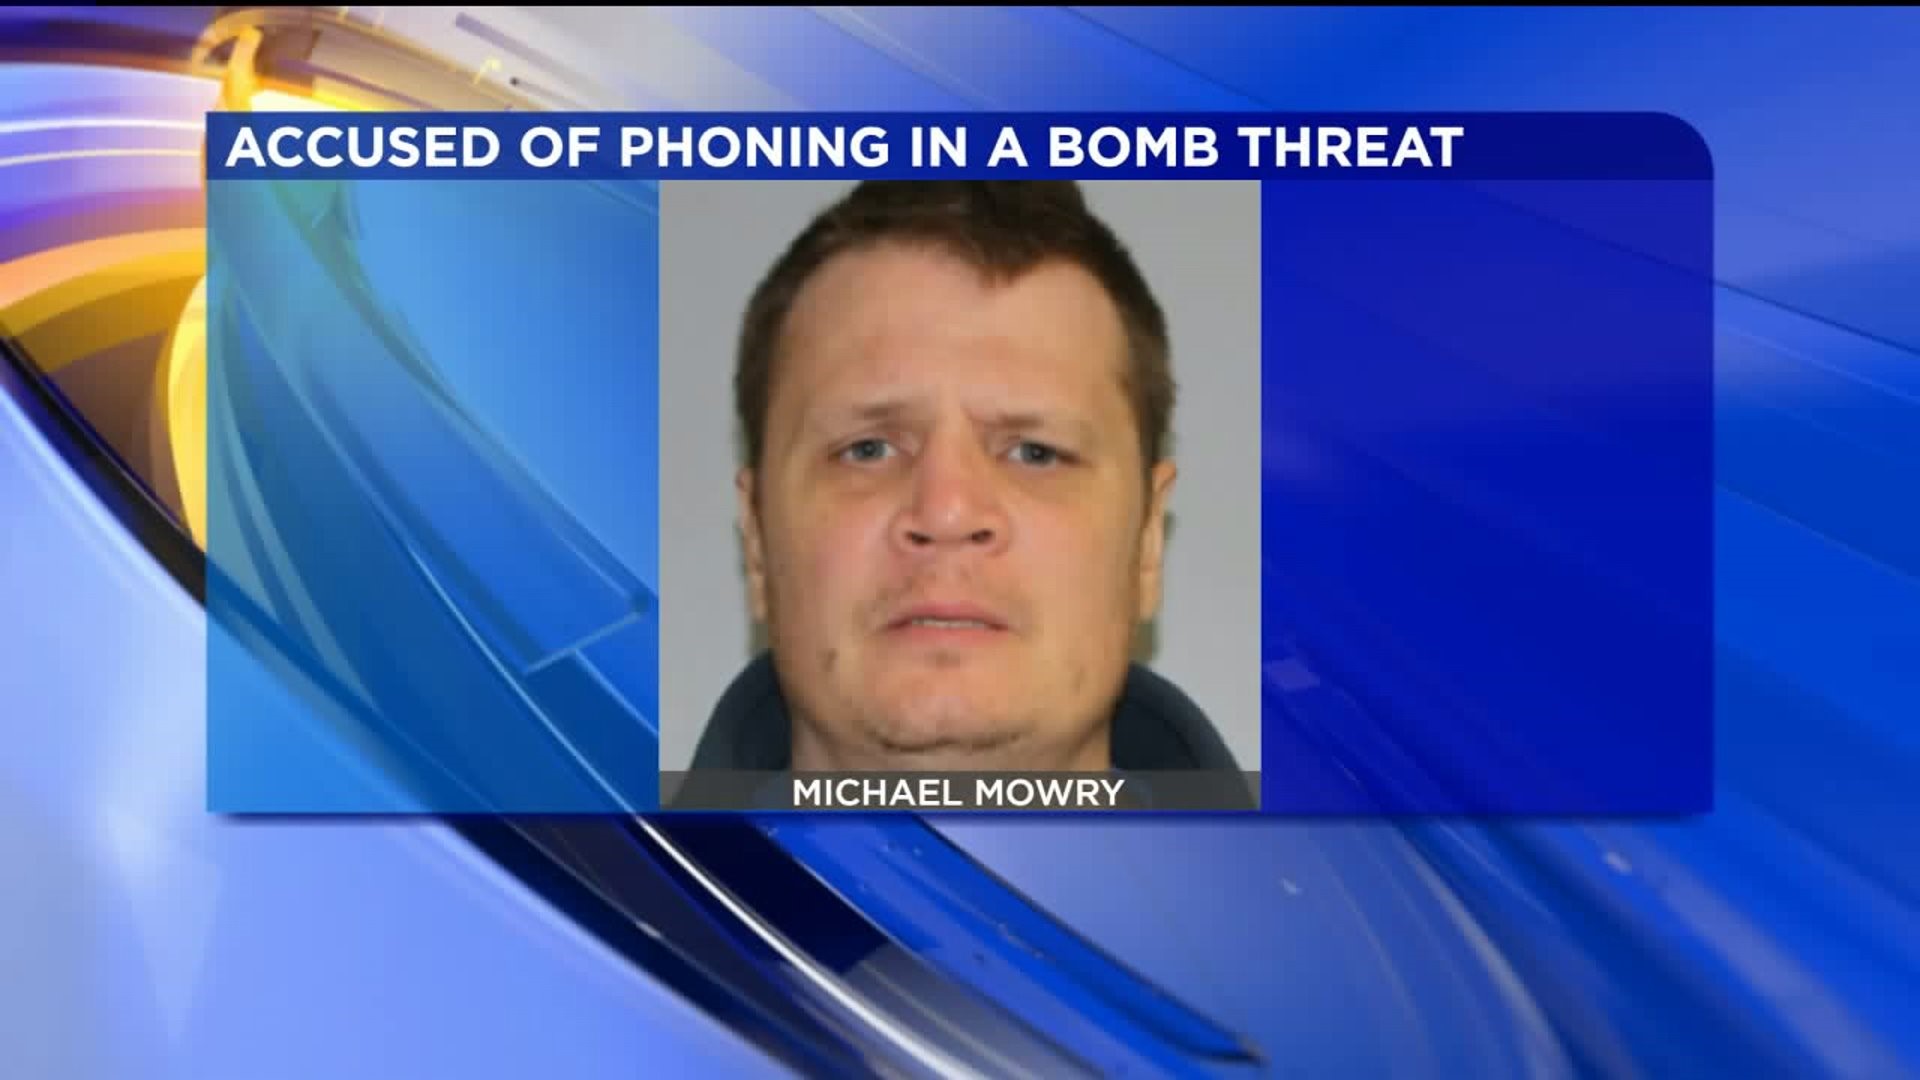 Man Accused of Phoning in Bomb Threat